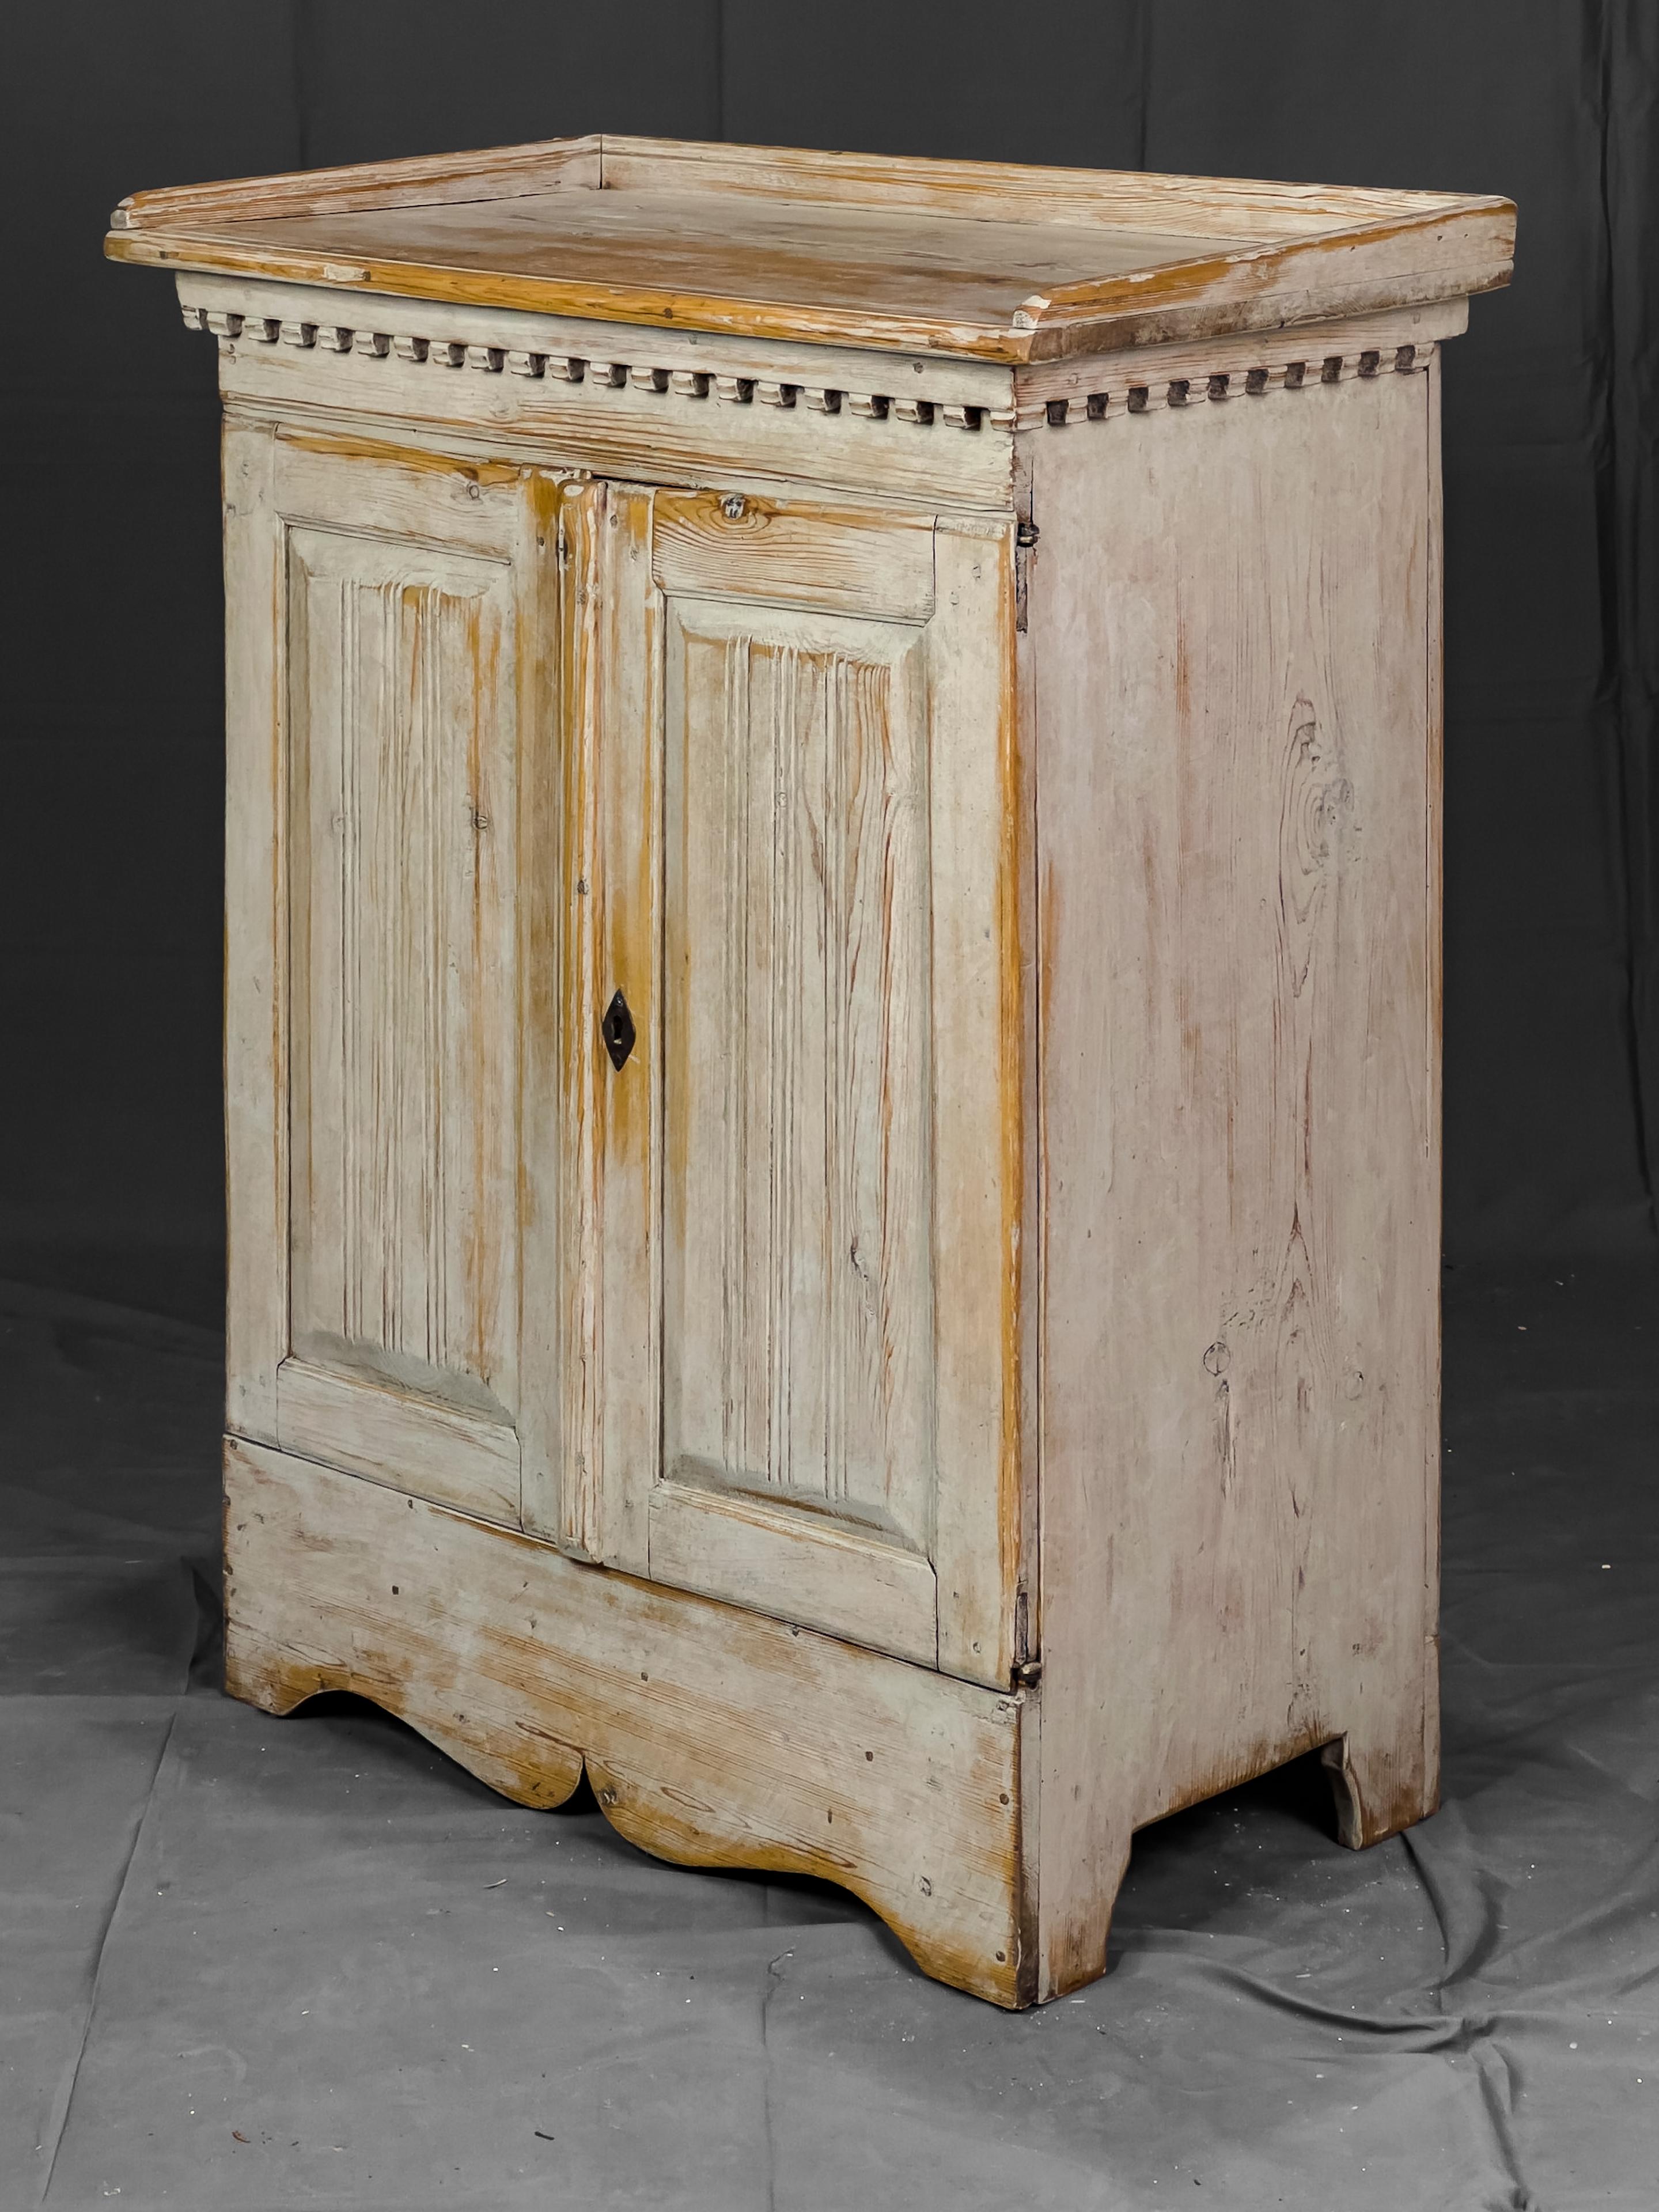 18th Century Swedish two door cupboard with original paint. 

The doors have a reeded and raised panel detail and concealed hinges. 

The top surface has a low backsplash trim and dental molding underneath.

This is a stunning piece and works